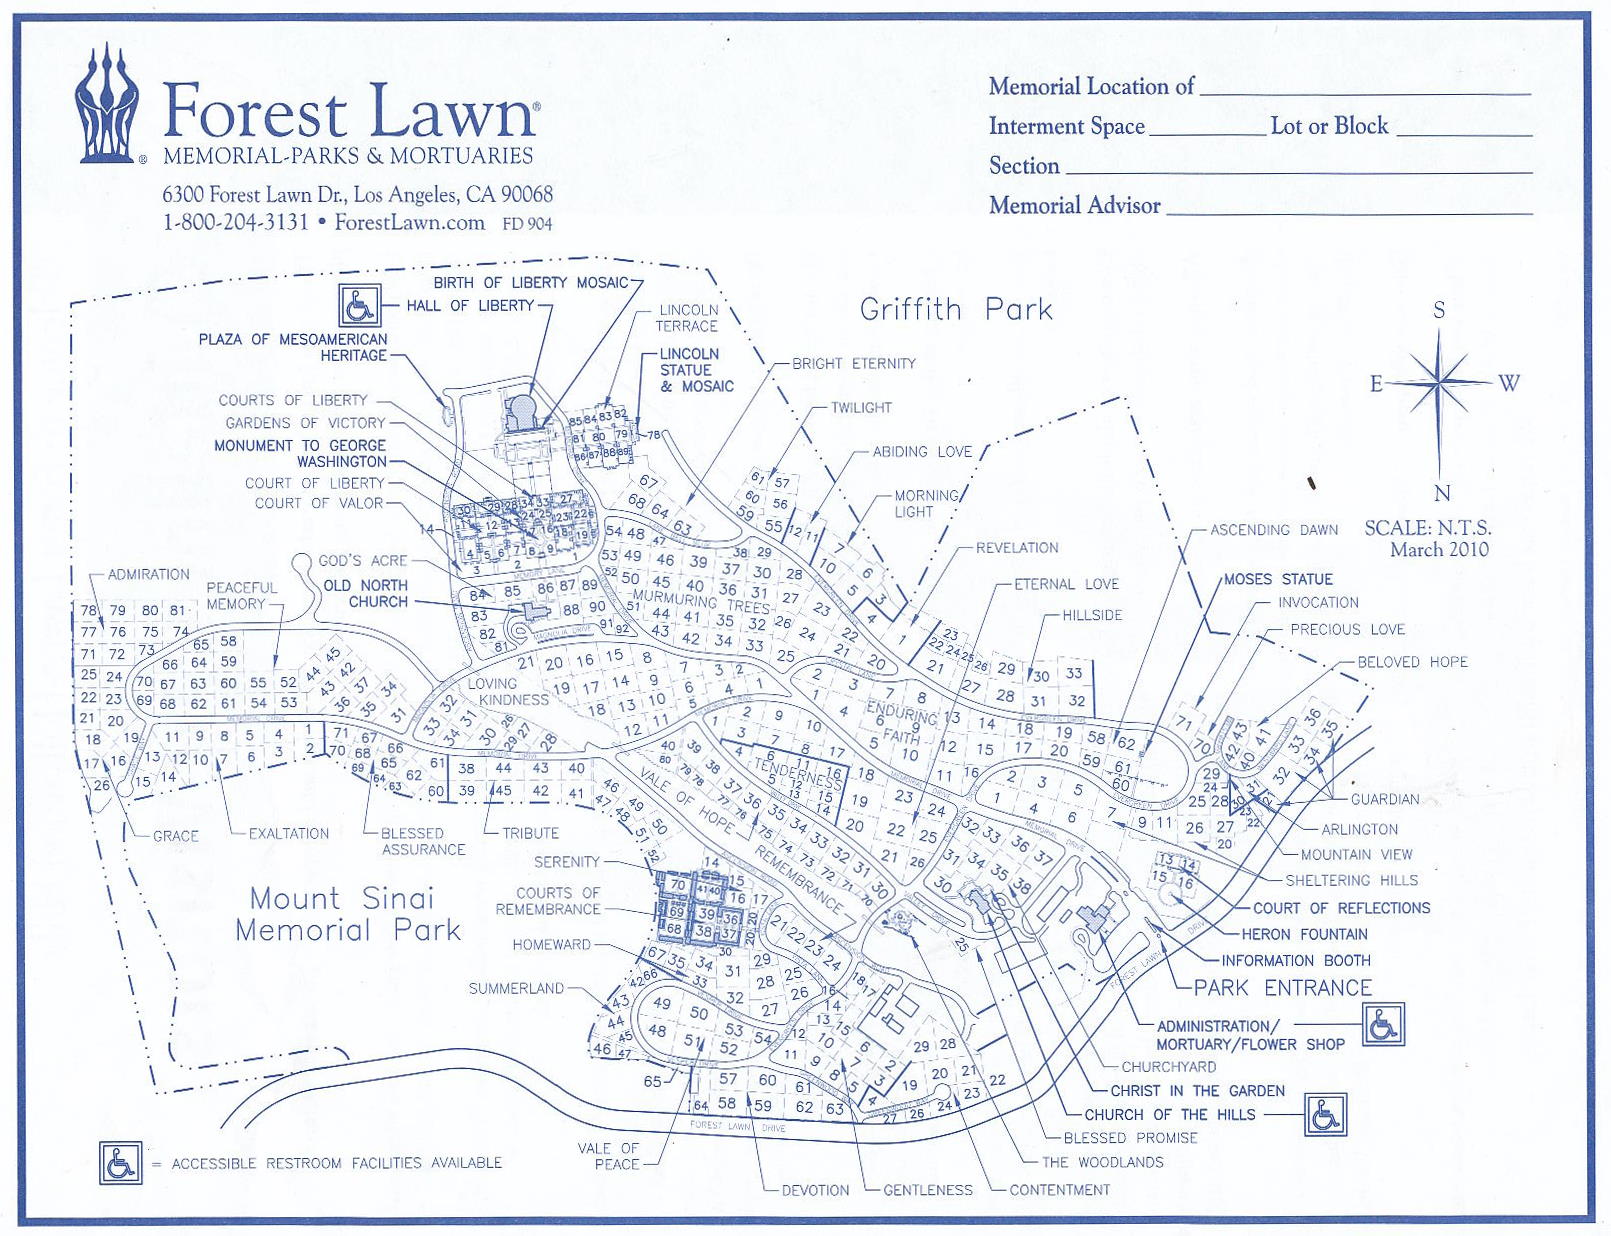 Map of Forest Lawn Memorial Park in Hollywood Hills, California